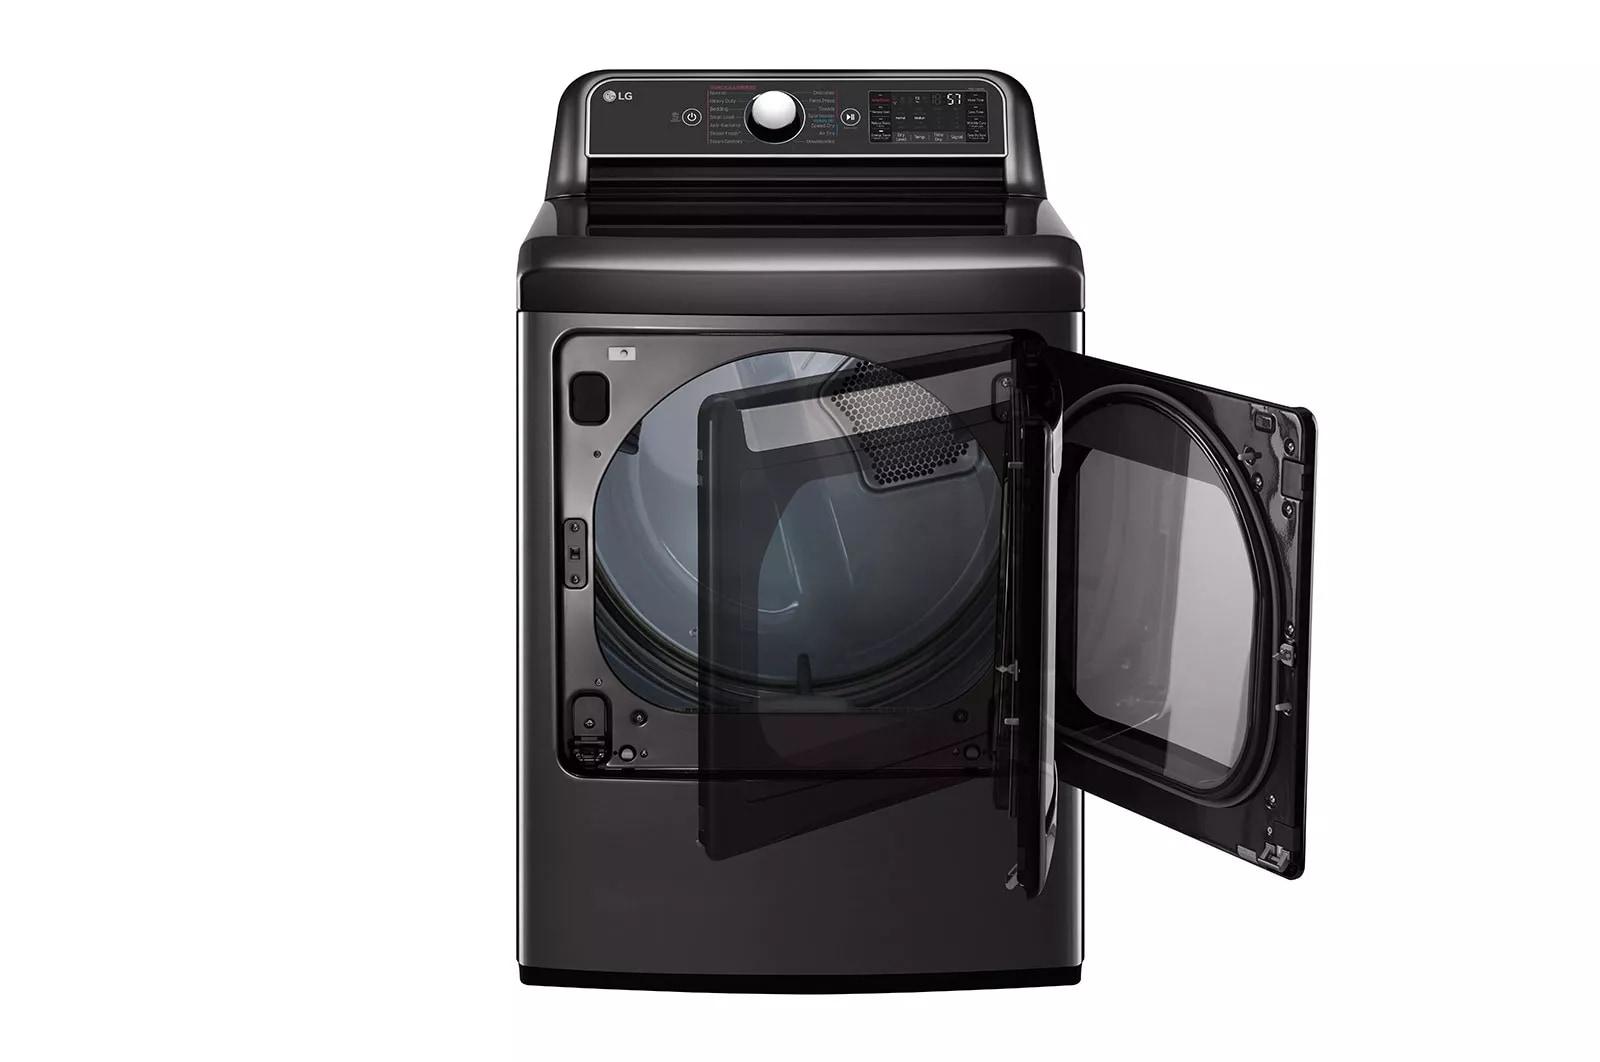 LG DLEX7900BE 7.3 Cu. Ft. Smart Wi-Fi Enabled Electric Dryer with TurboSteam - Black Steel - image 4 of 5